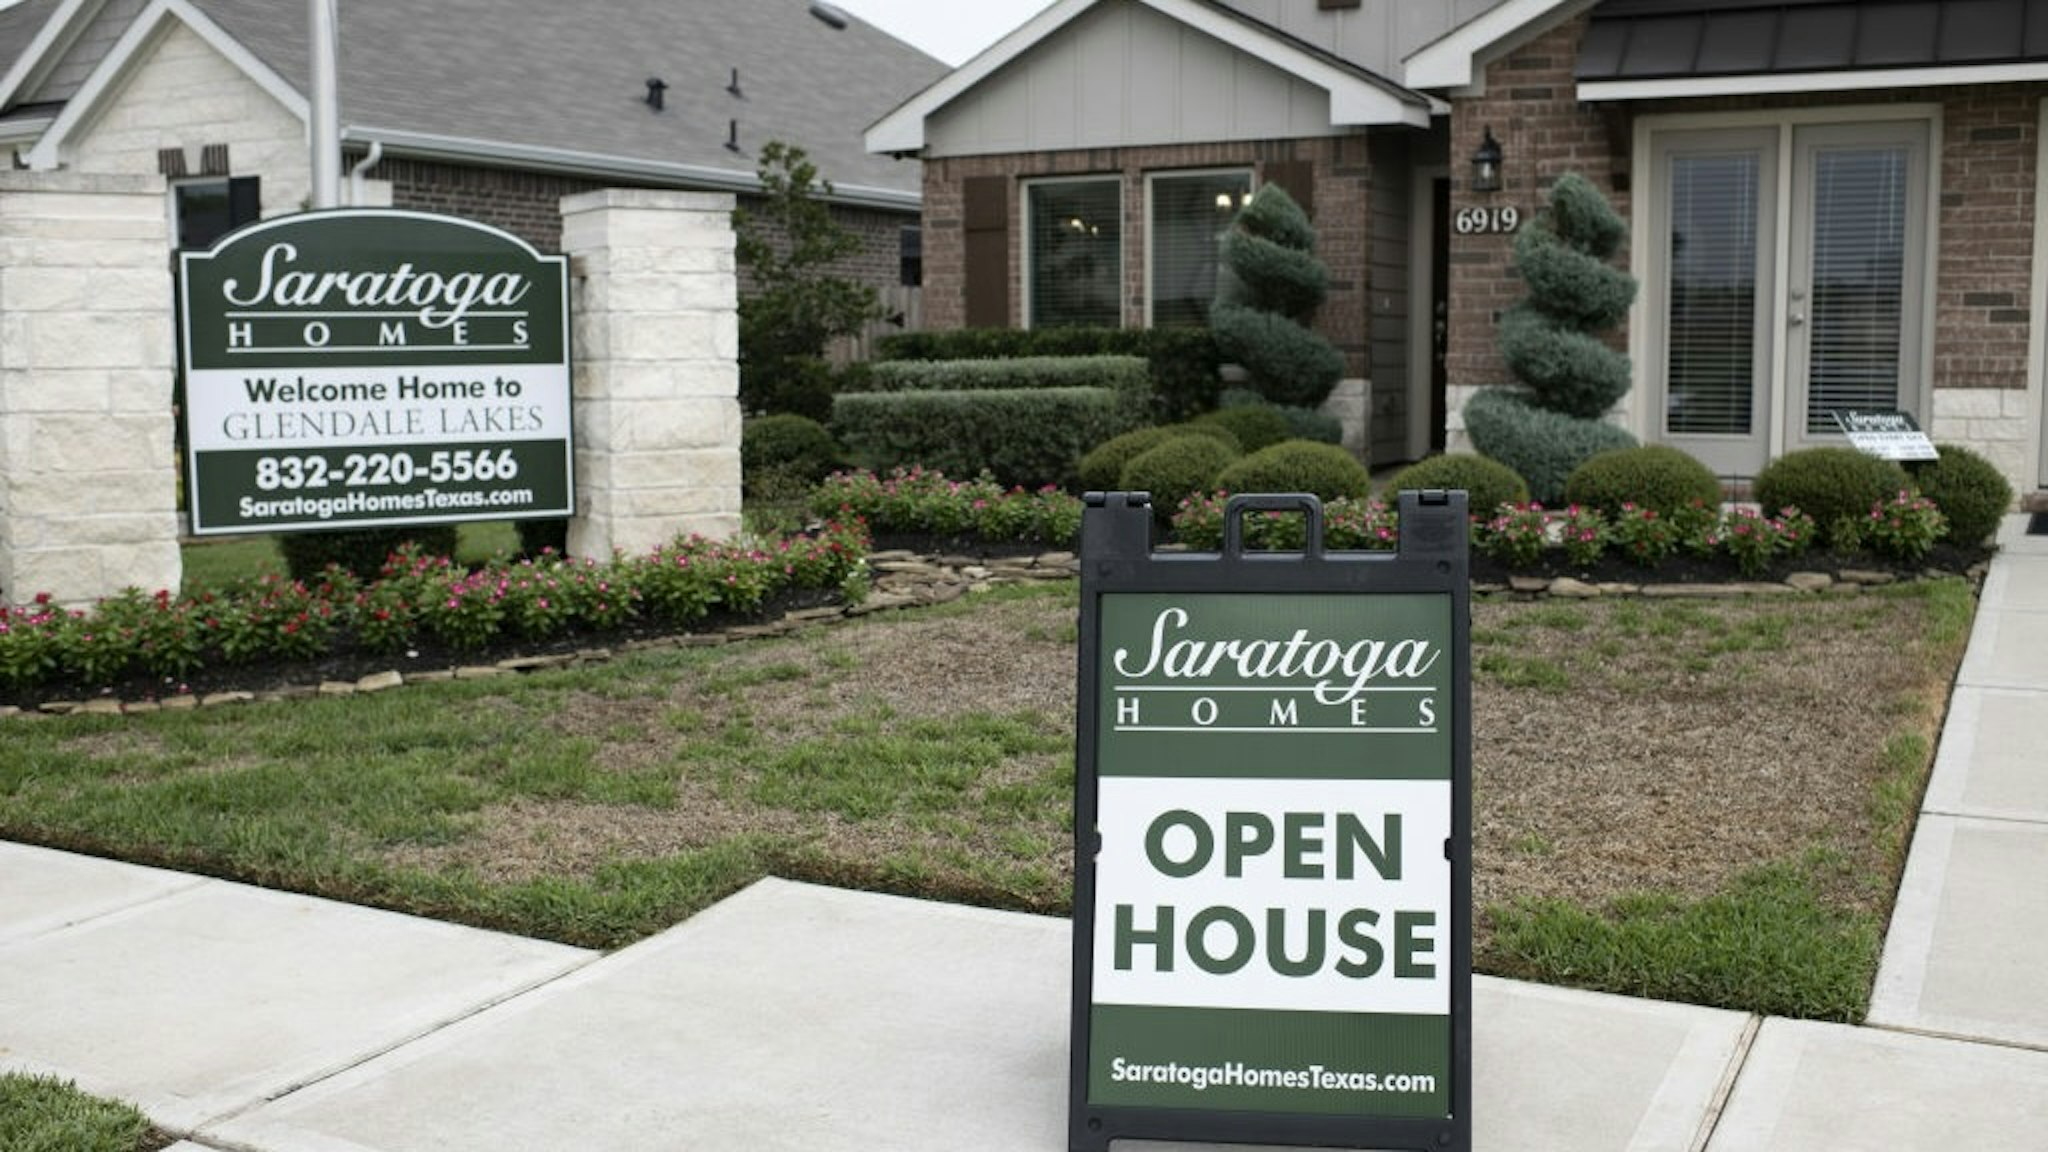 Homes For Sale Surge As Builders Are Stuck With Too Much Inventory An "Open House" sign at the Saratoga Homes Glendale Lakes community development in Arcola, Texas, US, on Tuesday, July 12, 2022. In an American housing market that for years has been plagued by too little inventory, builders are suddenly finding themselves with a glut of unsold homes. Photographer: Mark Felix/Bloomberg via Getty Images Bloomberg / Contributor